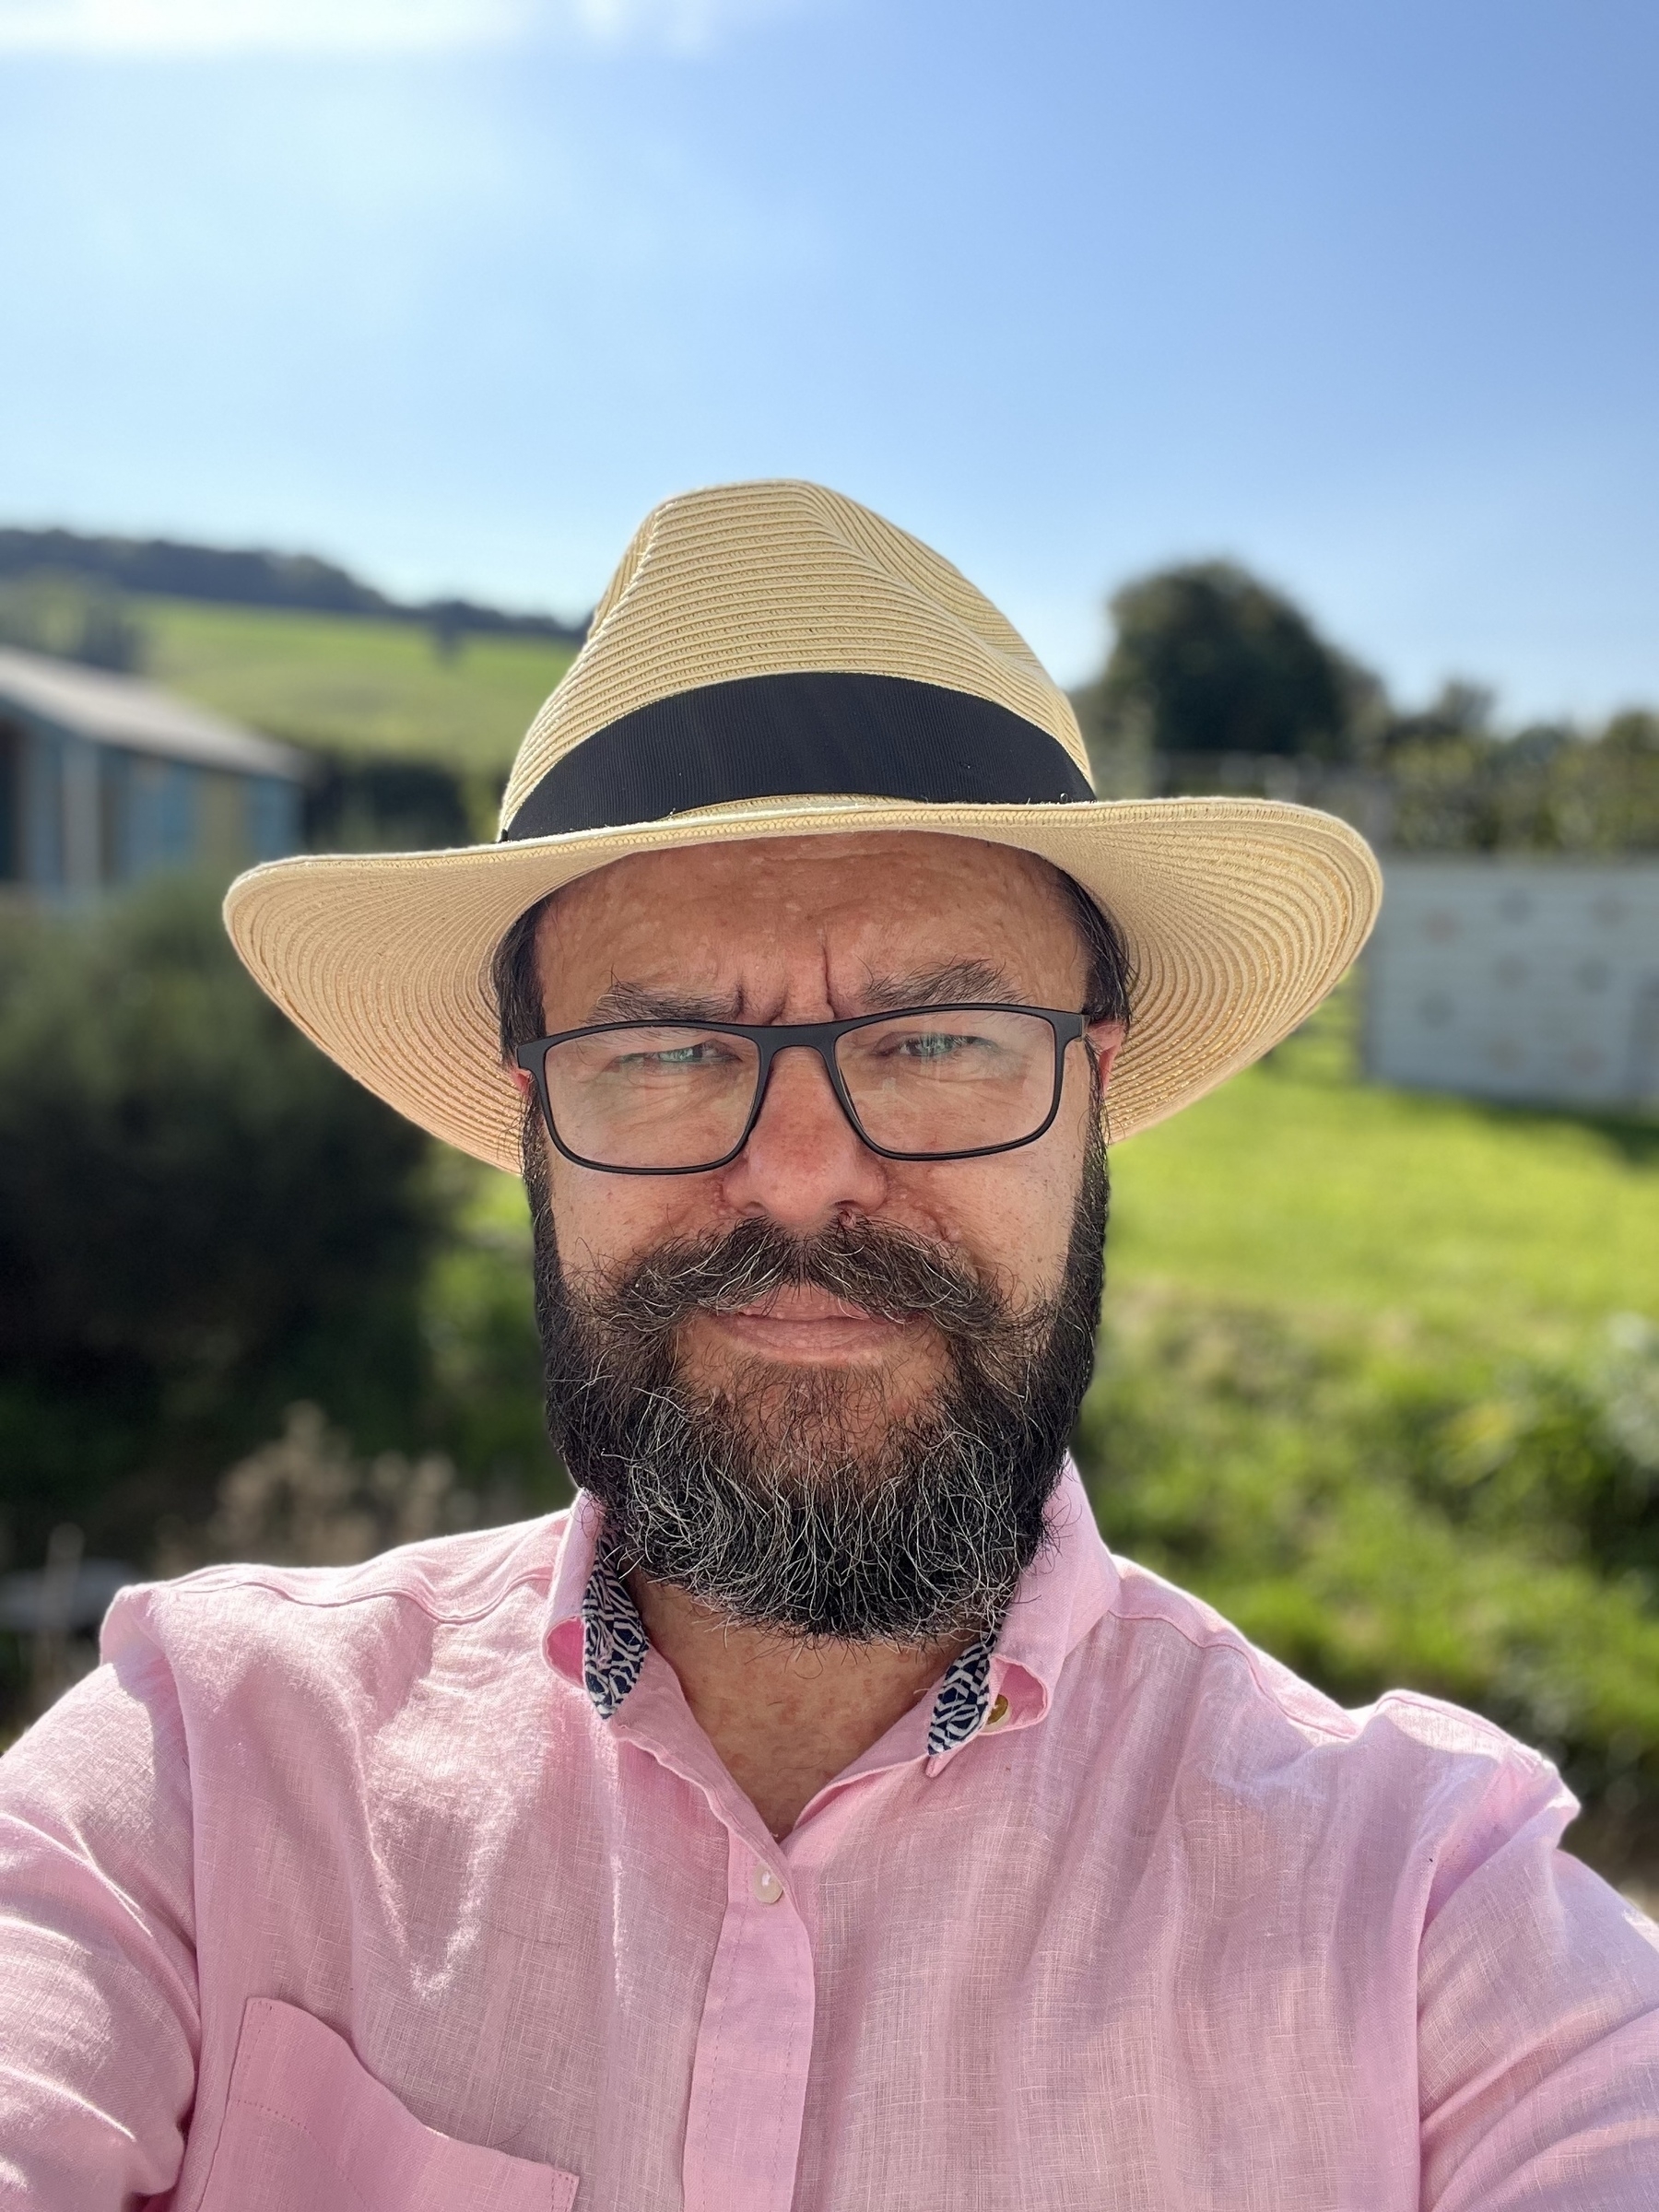 A beardy faced man grins smugly. He has glasses, wears a pink linen shirt and a straw fedora sits atop his huge bonce. 